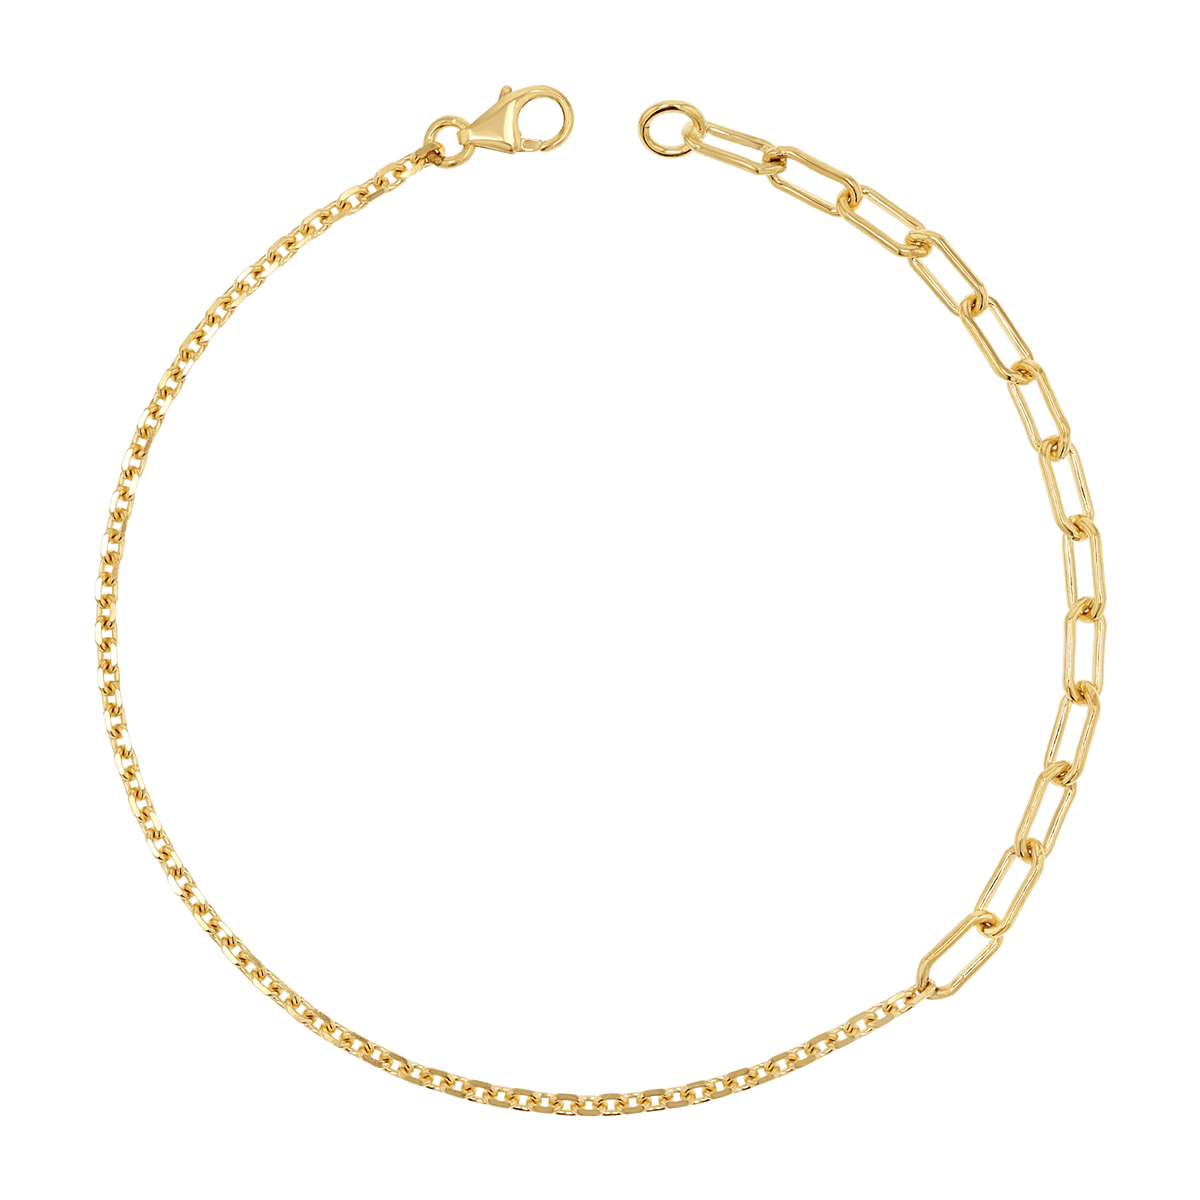 14K Grand Paper Clip Chain Bracelet 14K Yellow Gold / 6.5 Inches by Baby Gold - Shop Custom Gold Jewelry